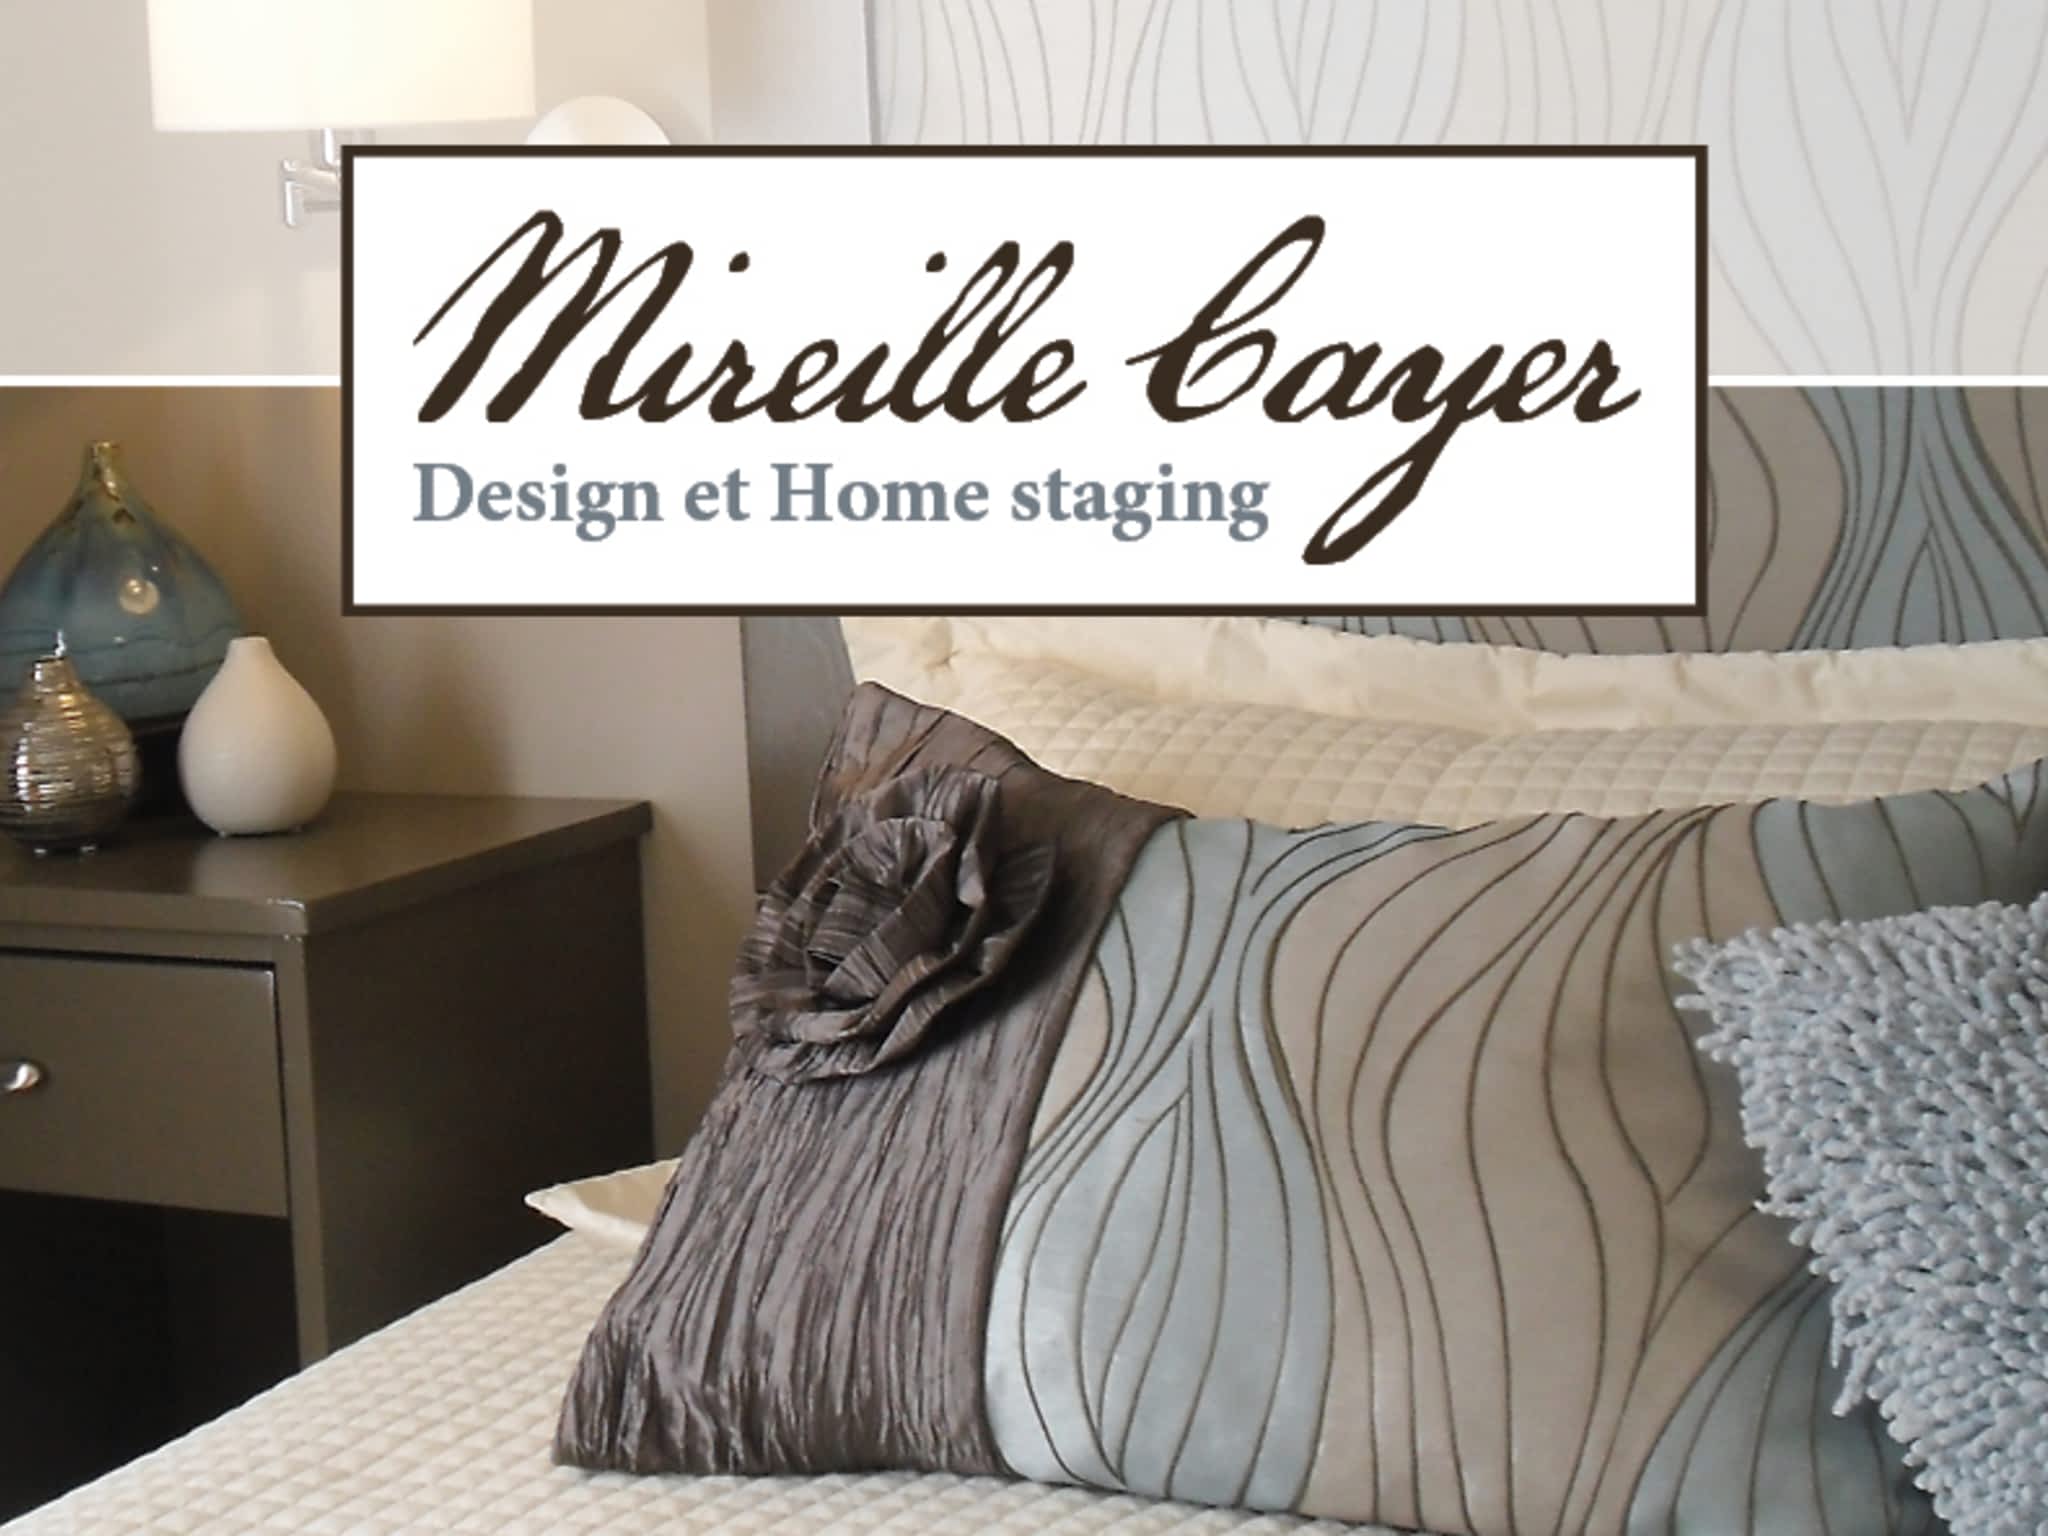 photo Mireille Cayer Design & Home Staging